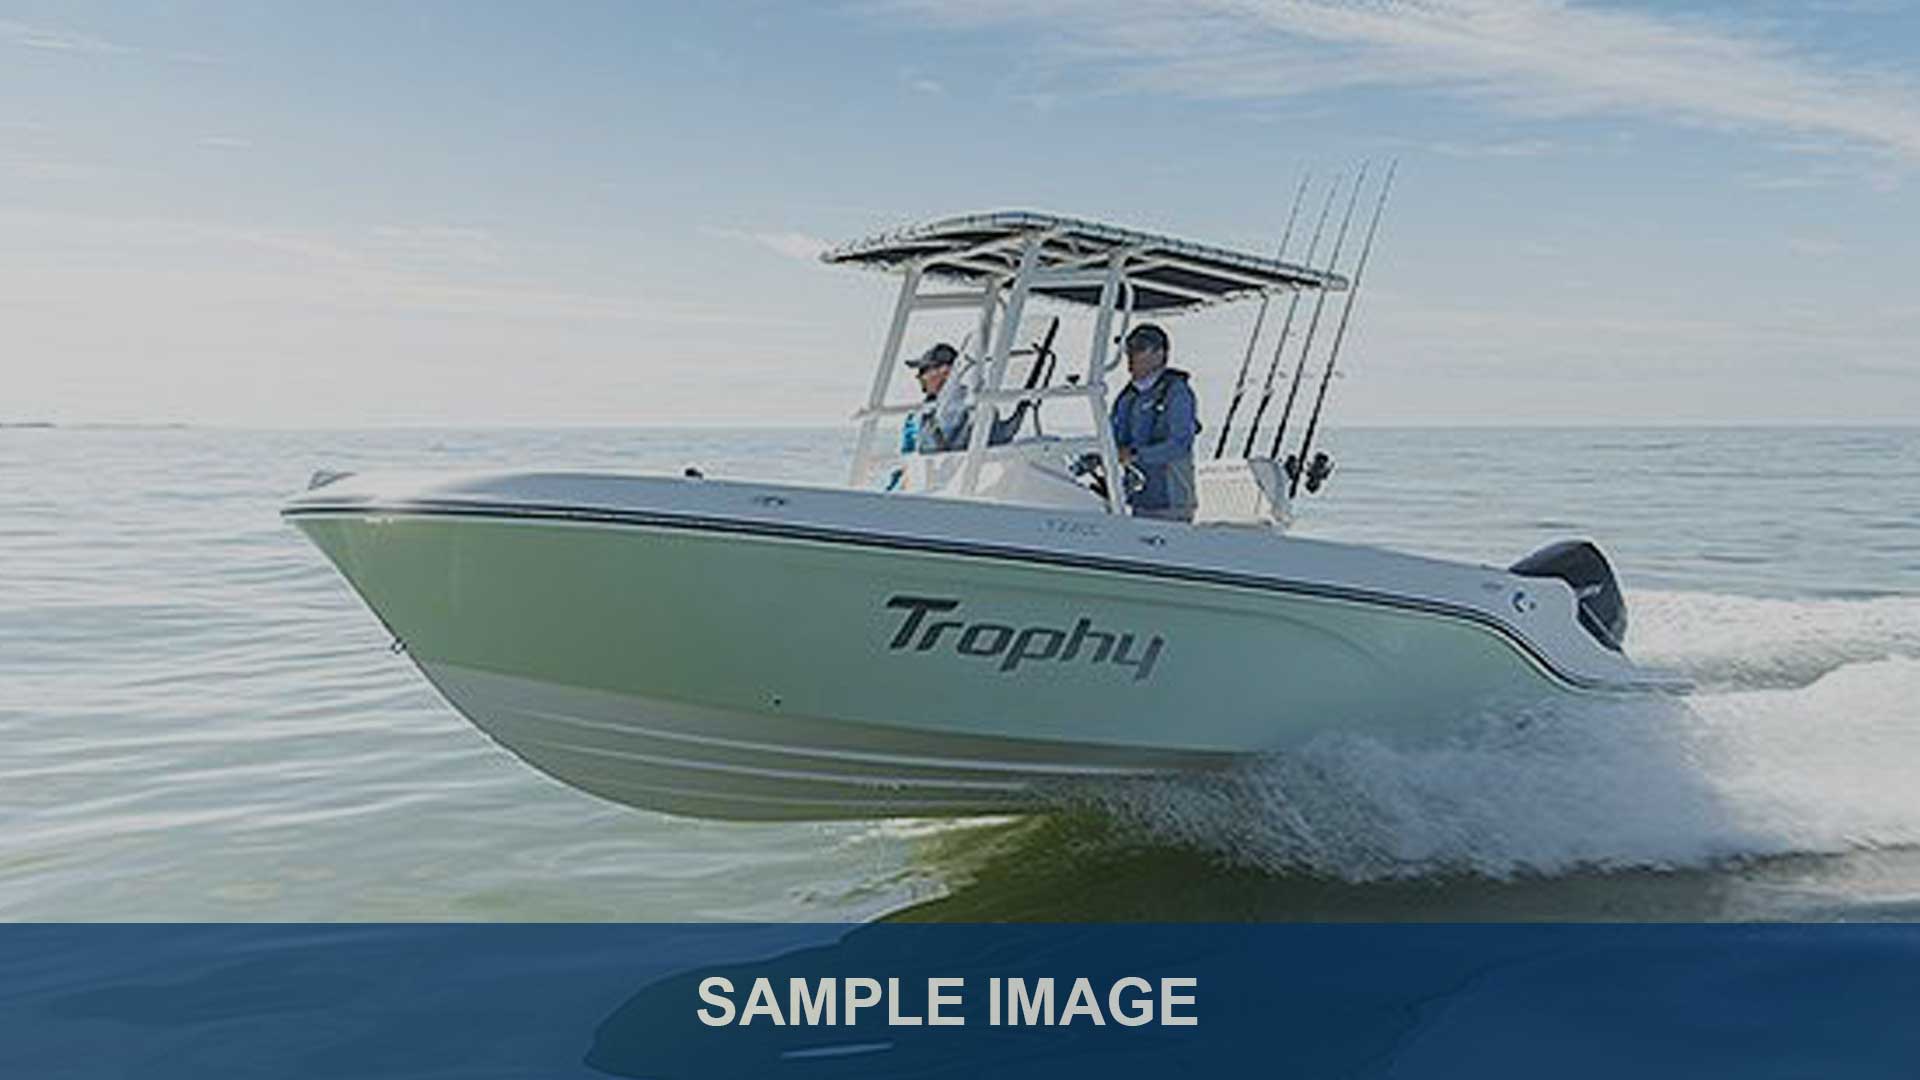 REELIN' RONNA (23FT Bayliner Trophy Center Console - 150 HP~Fishing)